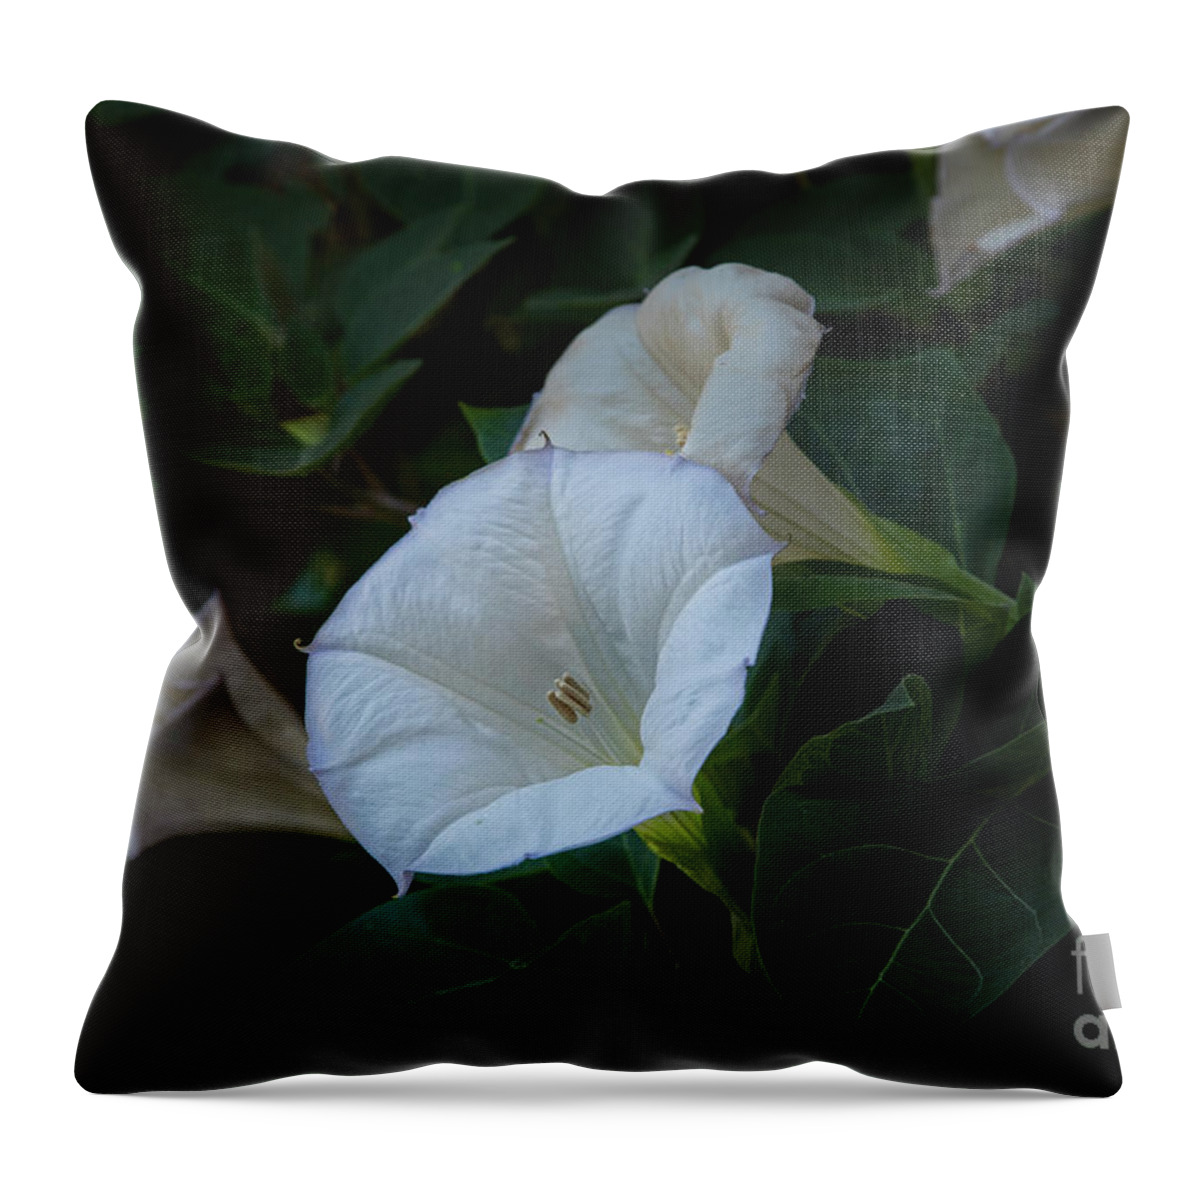 Botanic Gardens Throw Pillow featuring the photograph Moonlight Flower by Marilyn Cornwell